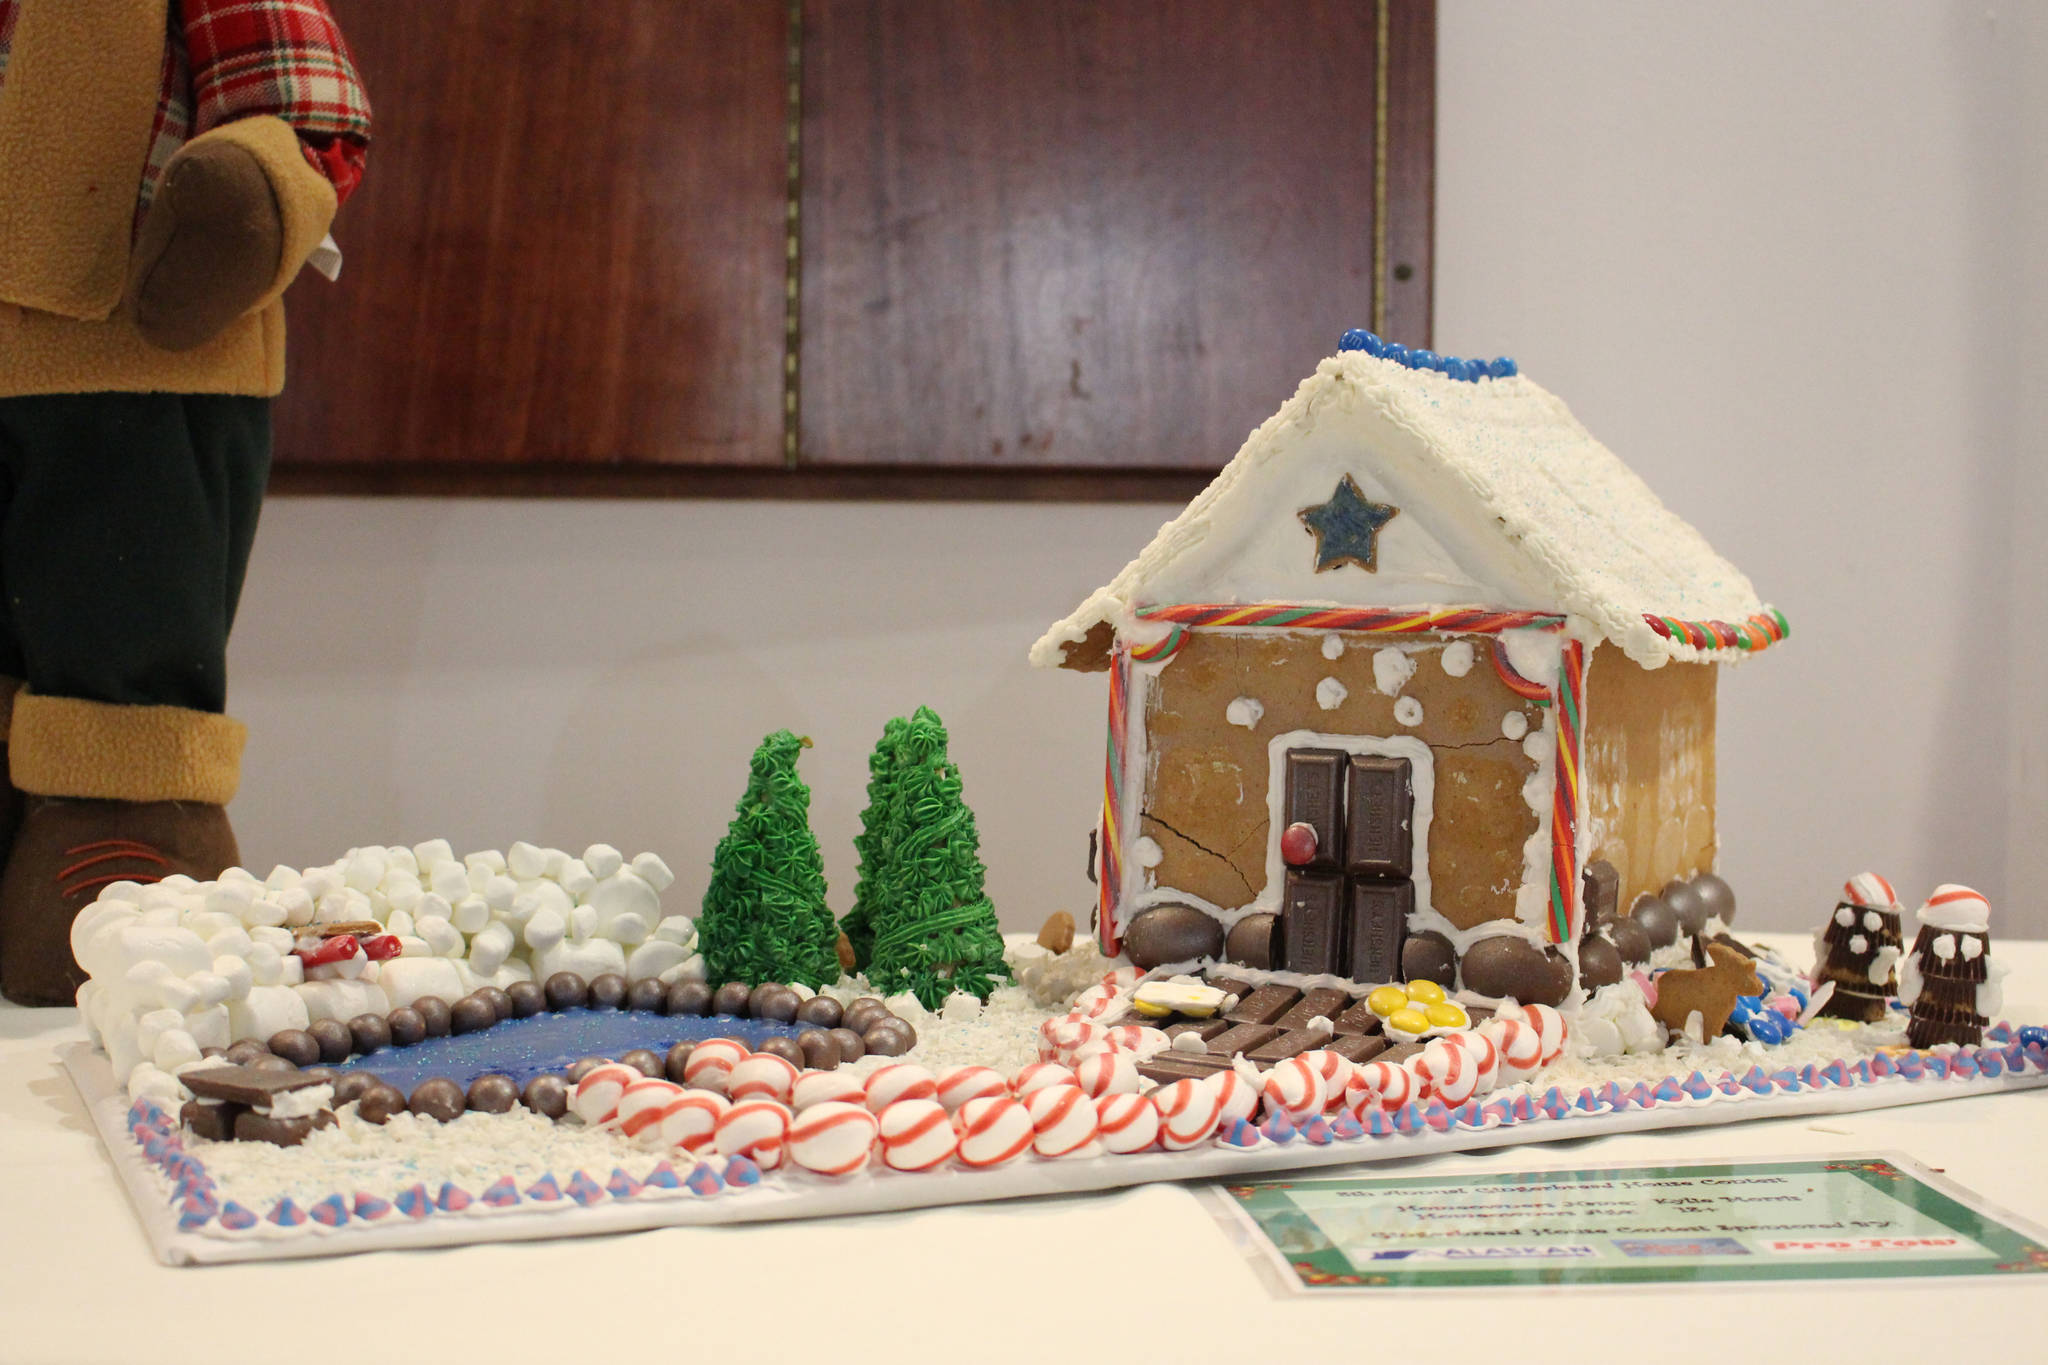 A gingerbread house created by Kylie Morris, age 18, is seen on display at the Kenai Visitors and Cultural Center on Dec. 8, 2020. (Photo by Brian Mazurek/Peninsula Clarion)